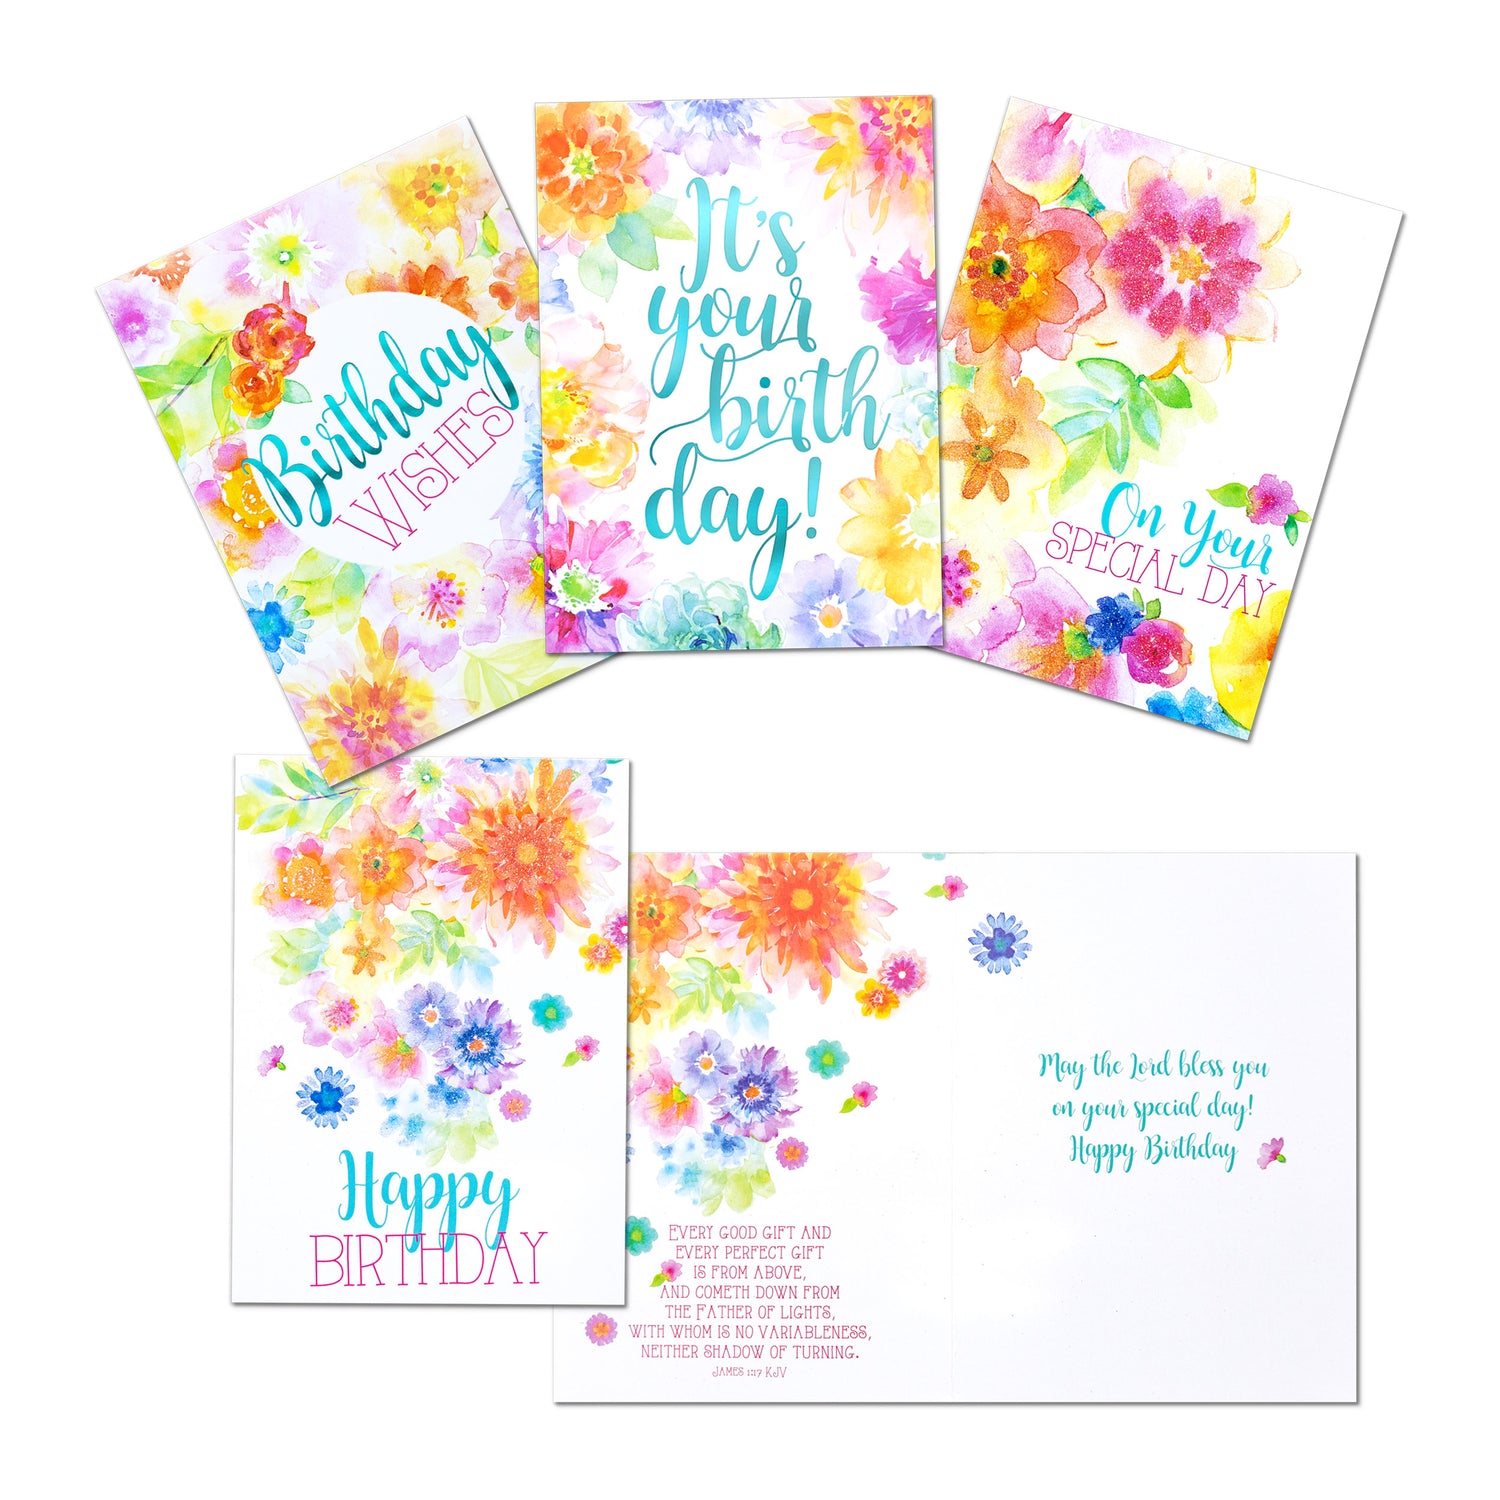 Shared Blessings Faith Based Greeting Cards Everyday